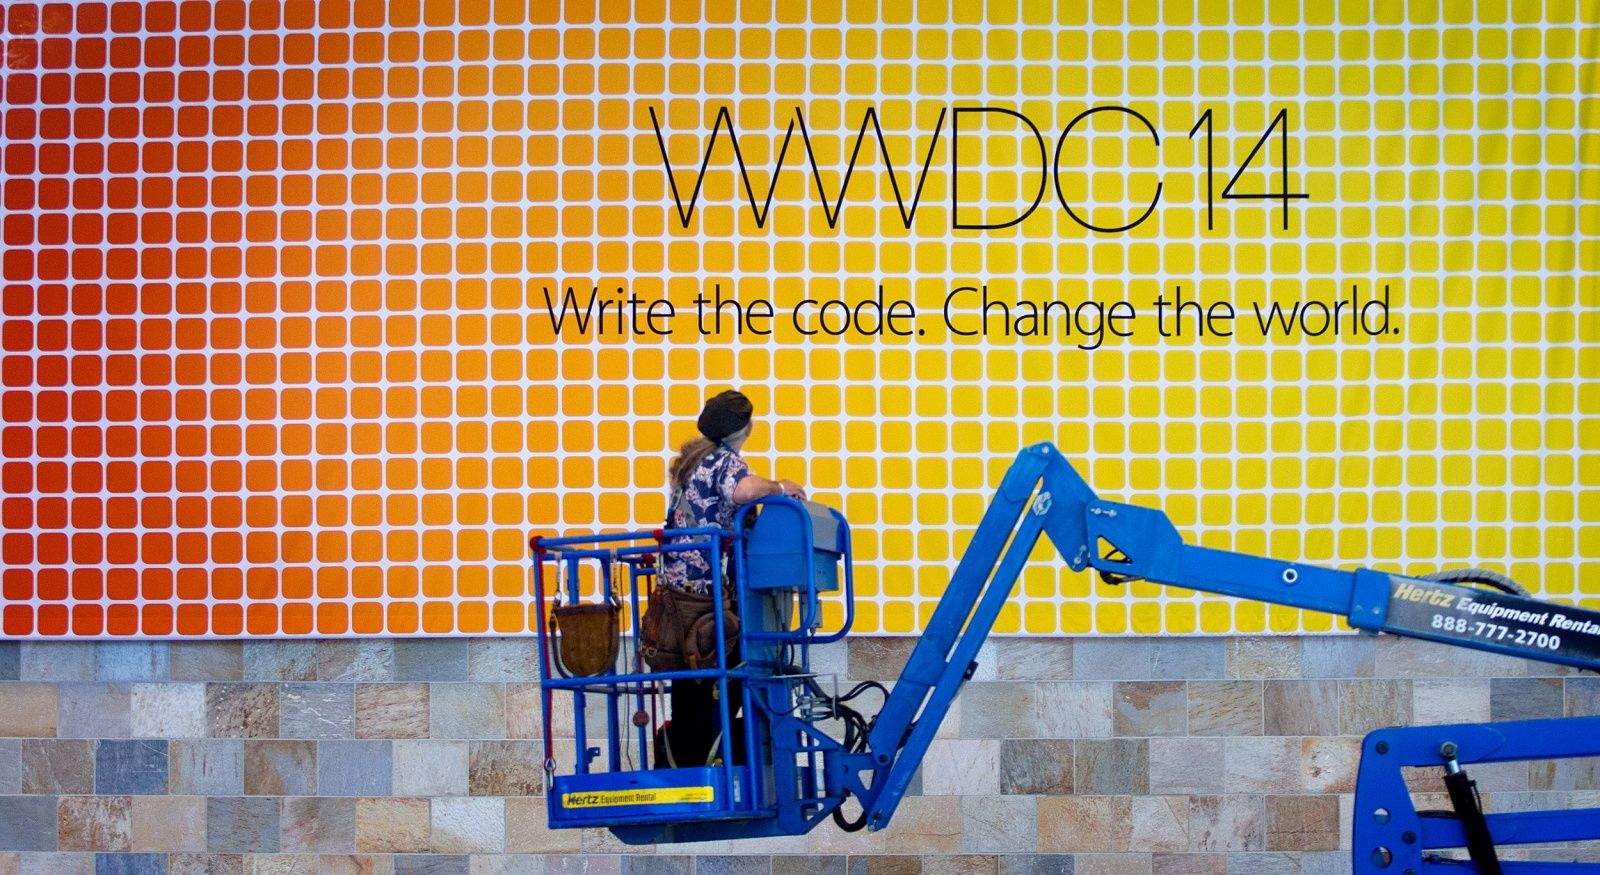 The 2014 WWDC banner gets the drop down at San Francisco's Moscone Center Tuesday afternoon May 27, 2014. Photo: Jim Merithew/Cult of Mac